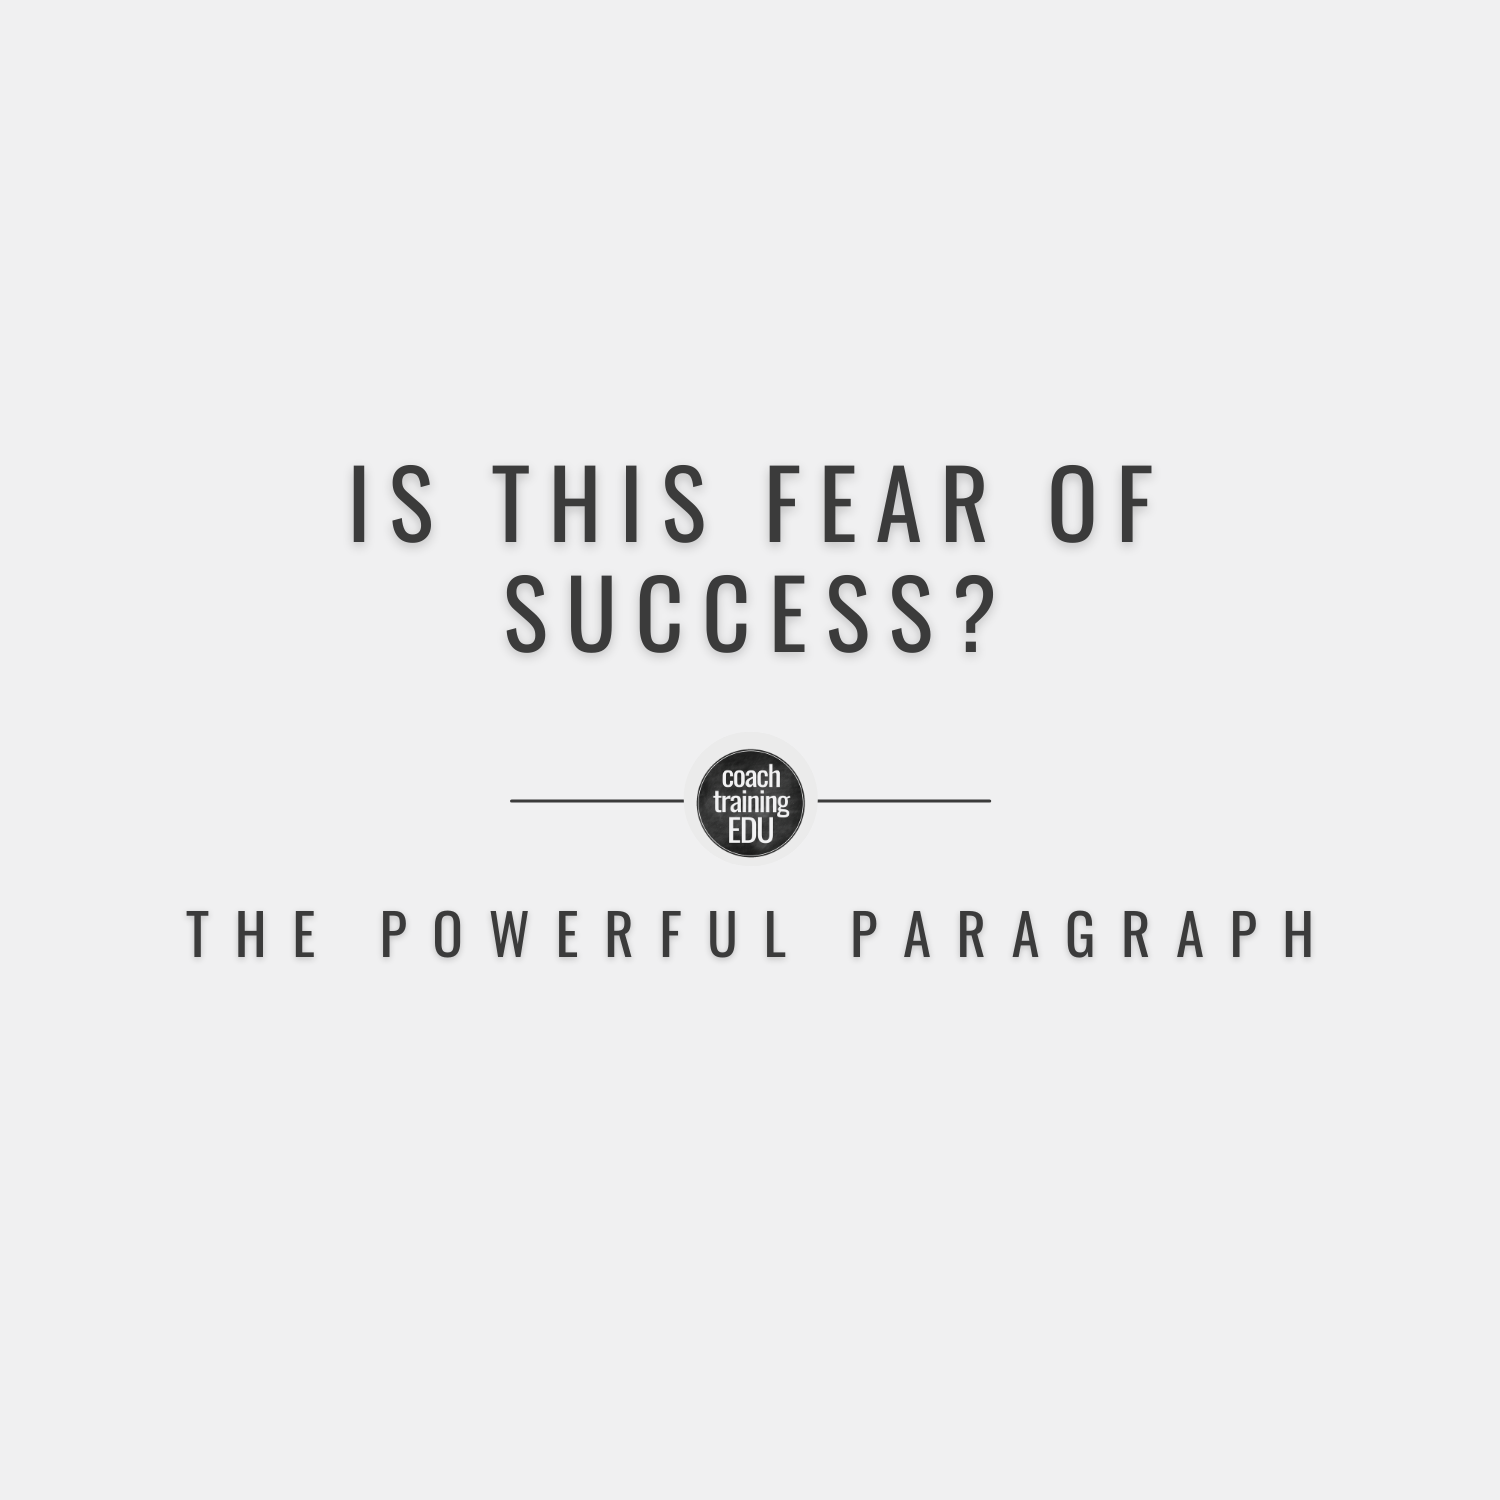 Is this Fear of Success?